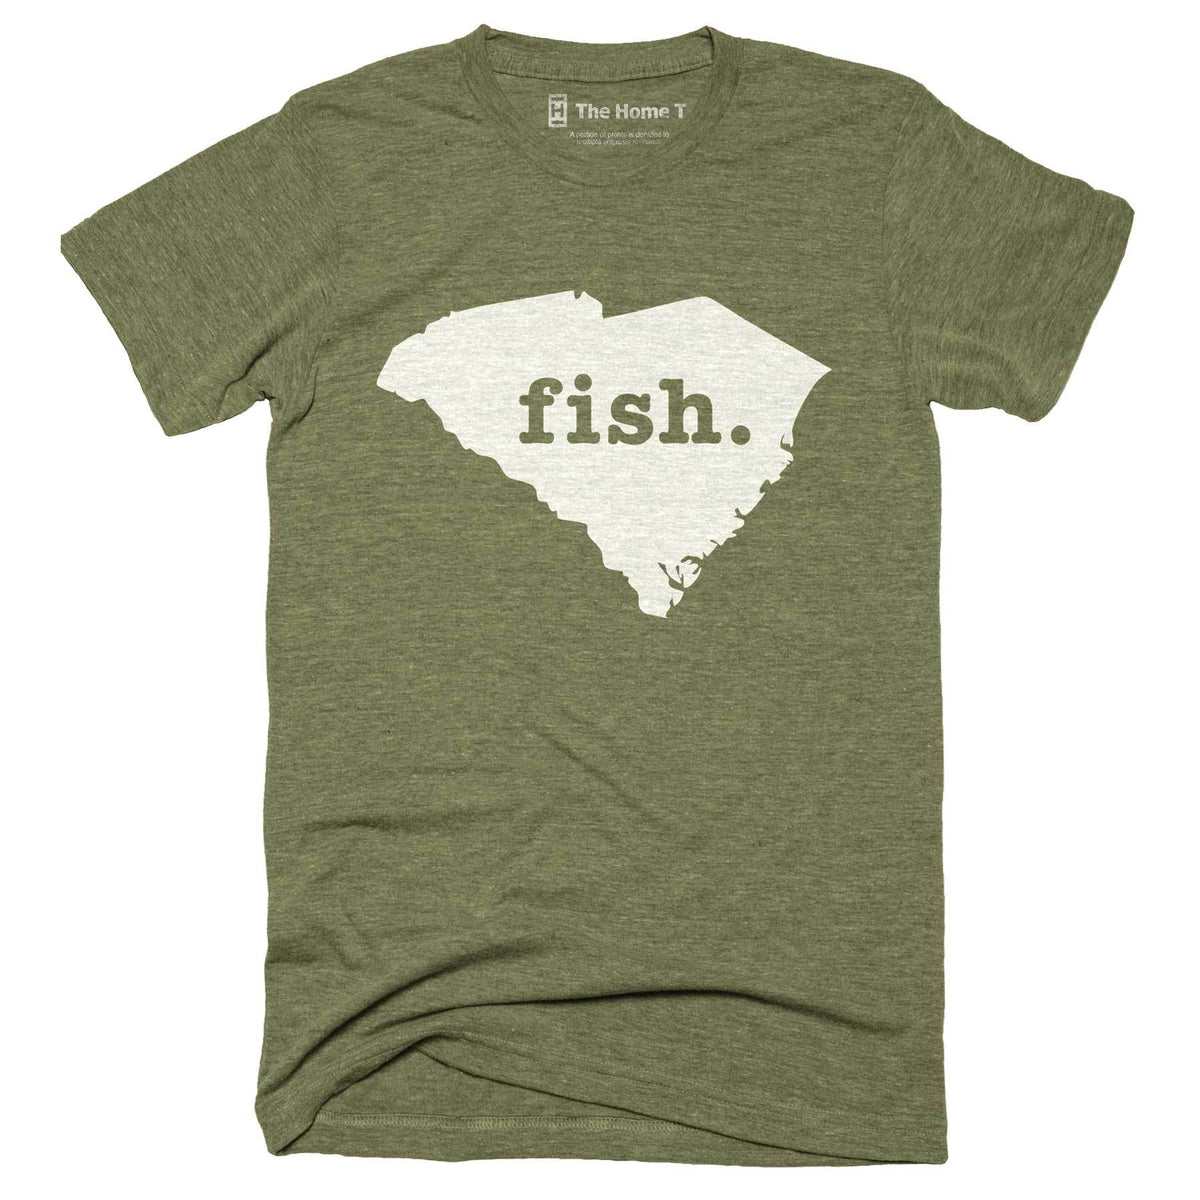 South Carolina Fish Home T-Shirt Outdoor Collection The Home T XXL Army Green